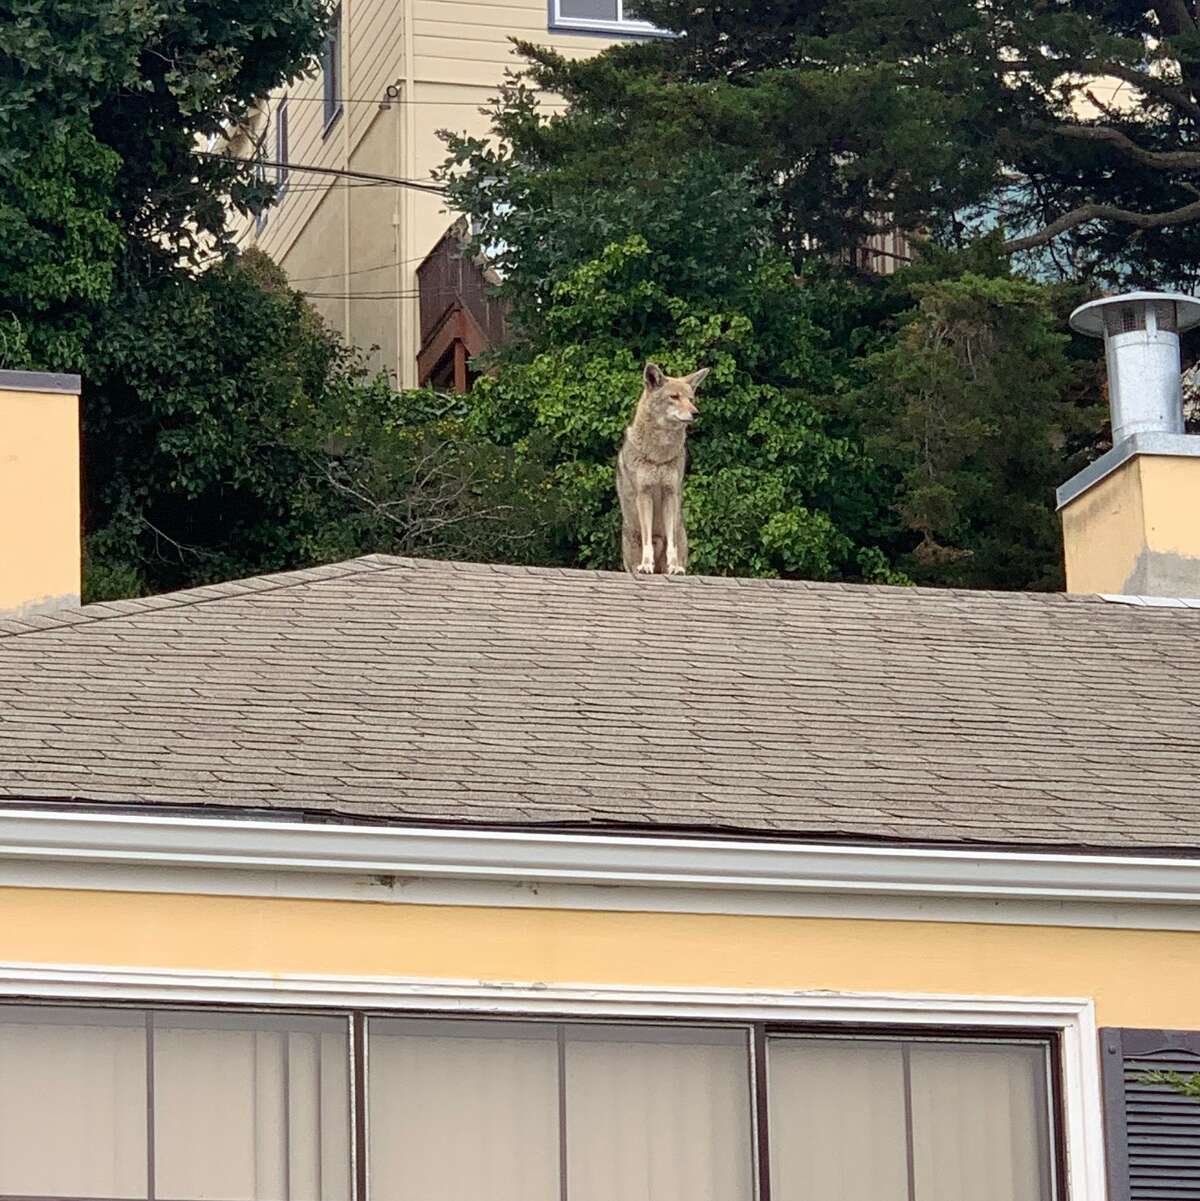 A coyote in San Francisco.